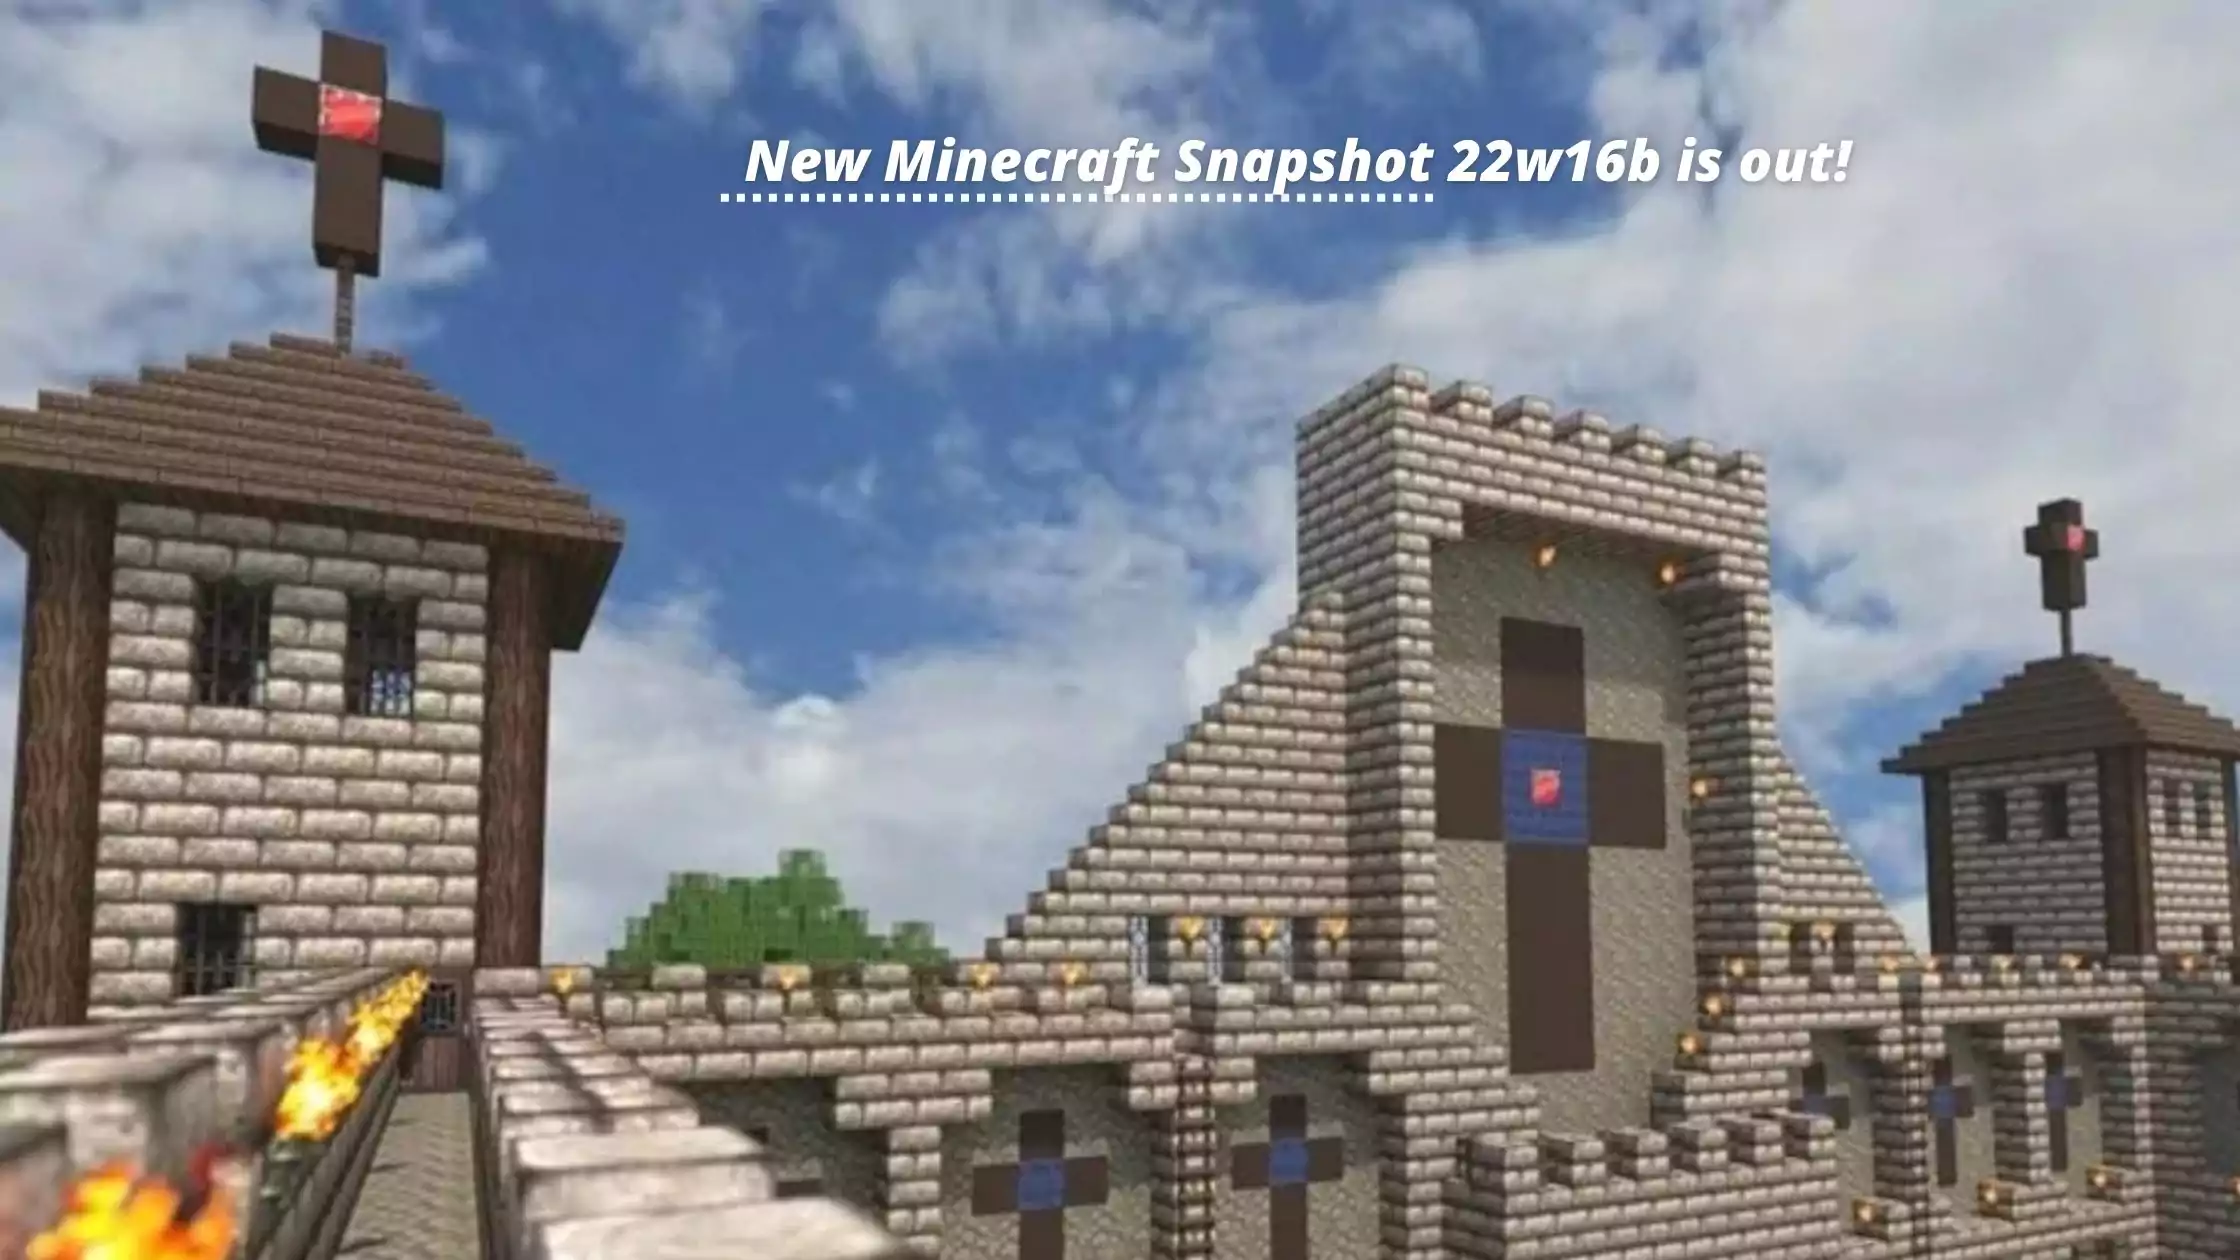 New Minecraft Snapshot 22w16b is out!